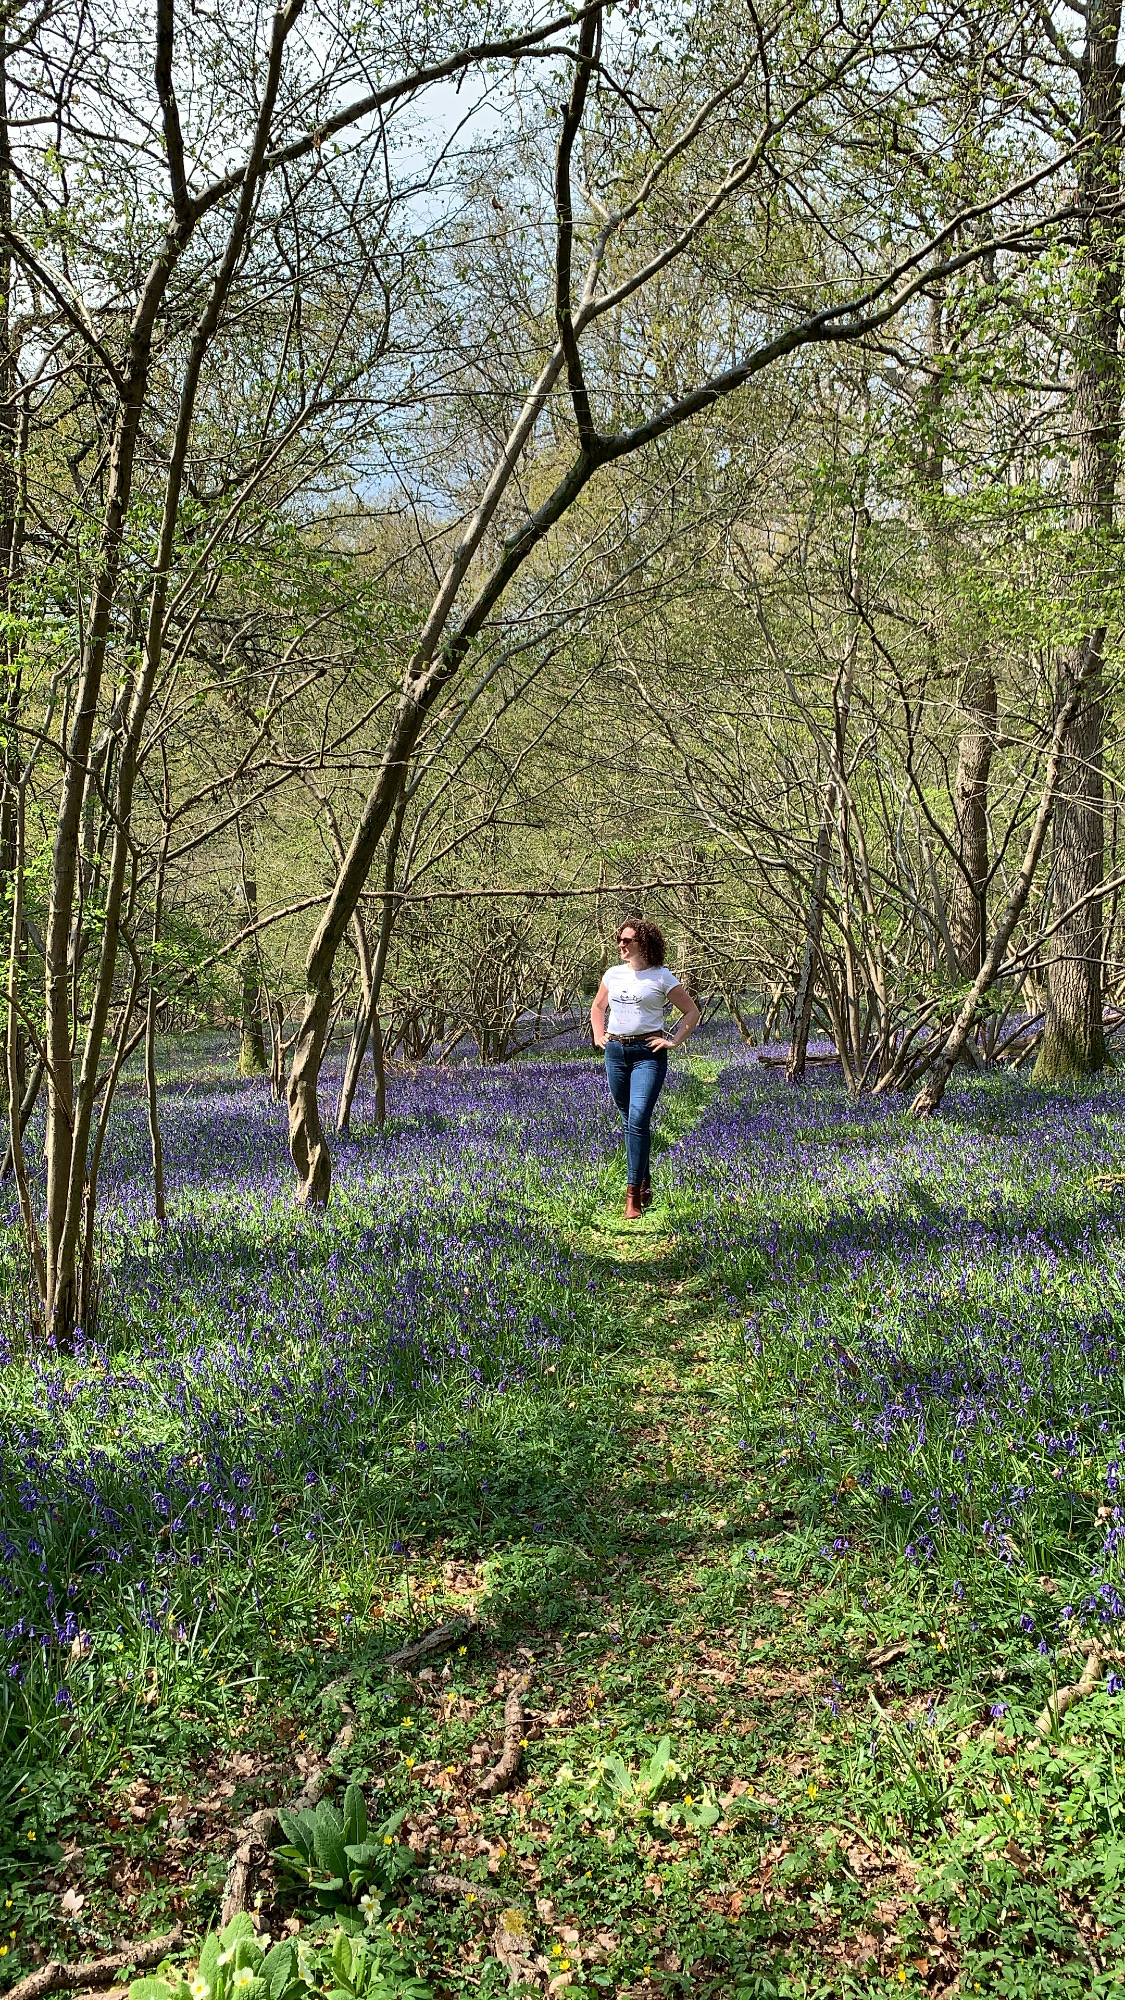 Becky Hughes walks through a wooded area, the ground is covered in bluebells